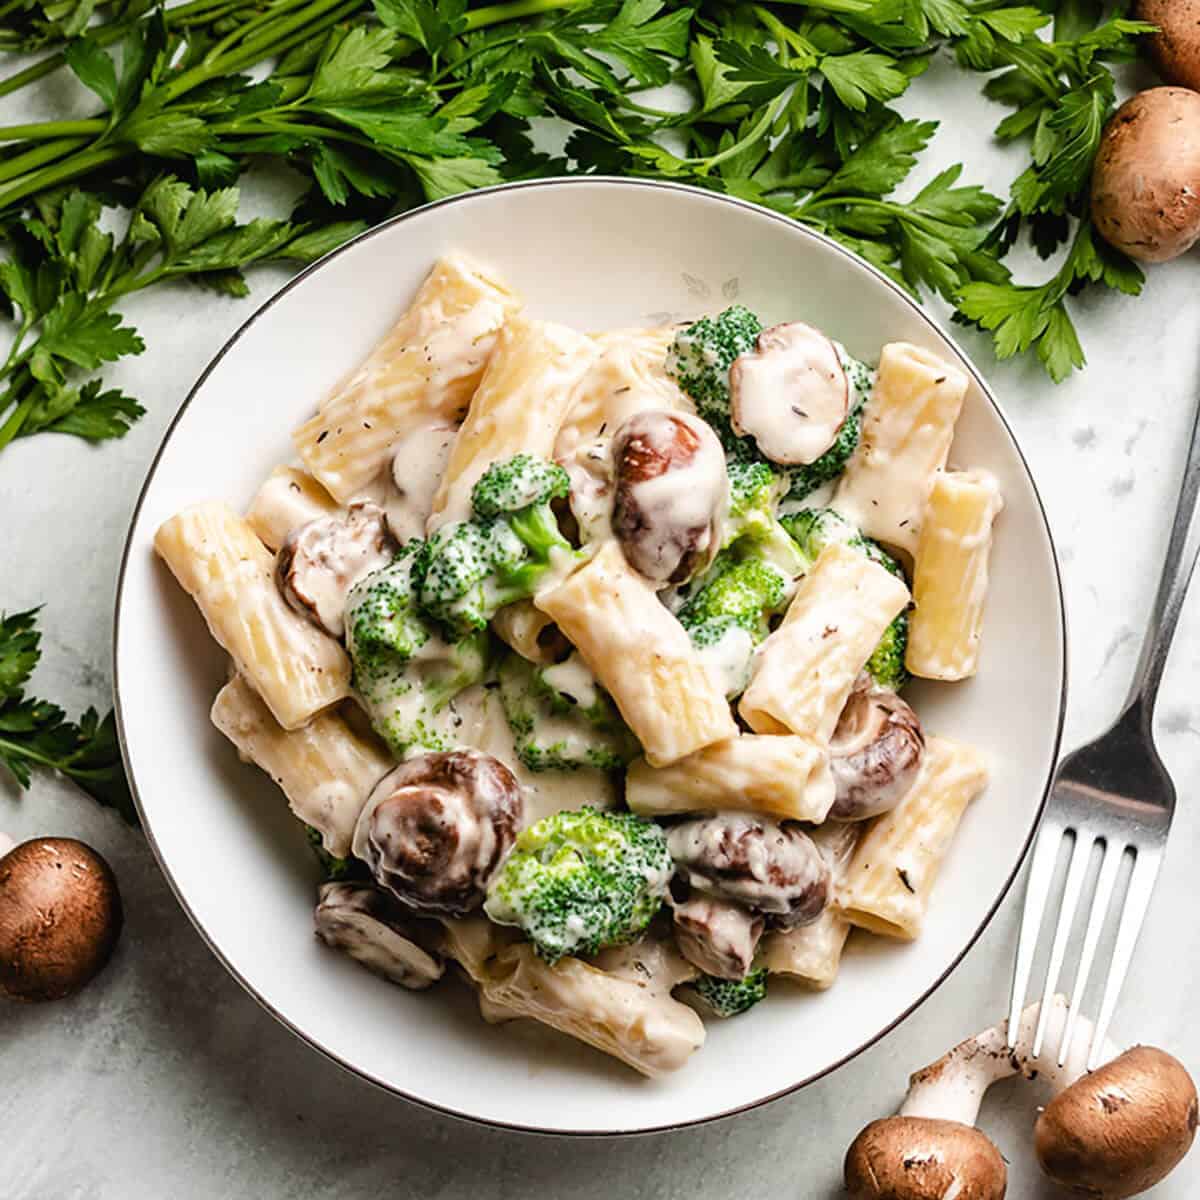 Plate of rigatoni pasta tossed with broccoli and mushrooms.